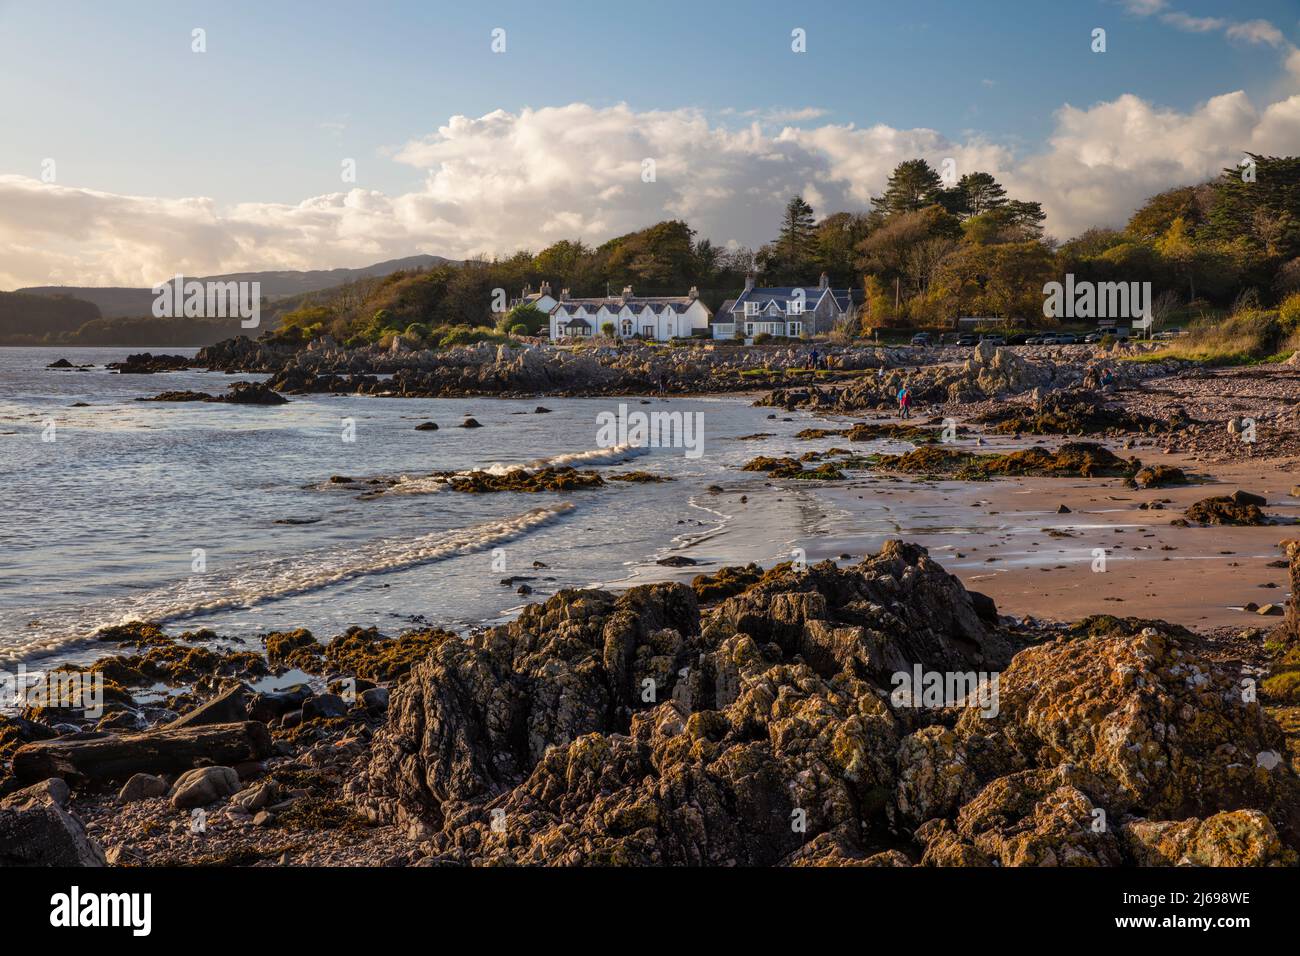 Beach and rocky coastline on the Solway Firth, Rockcliffe, Dalbeattie, Dumfries and Galloway, Scotland, United Kingdom, Europe Stock Photo